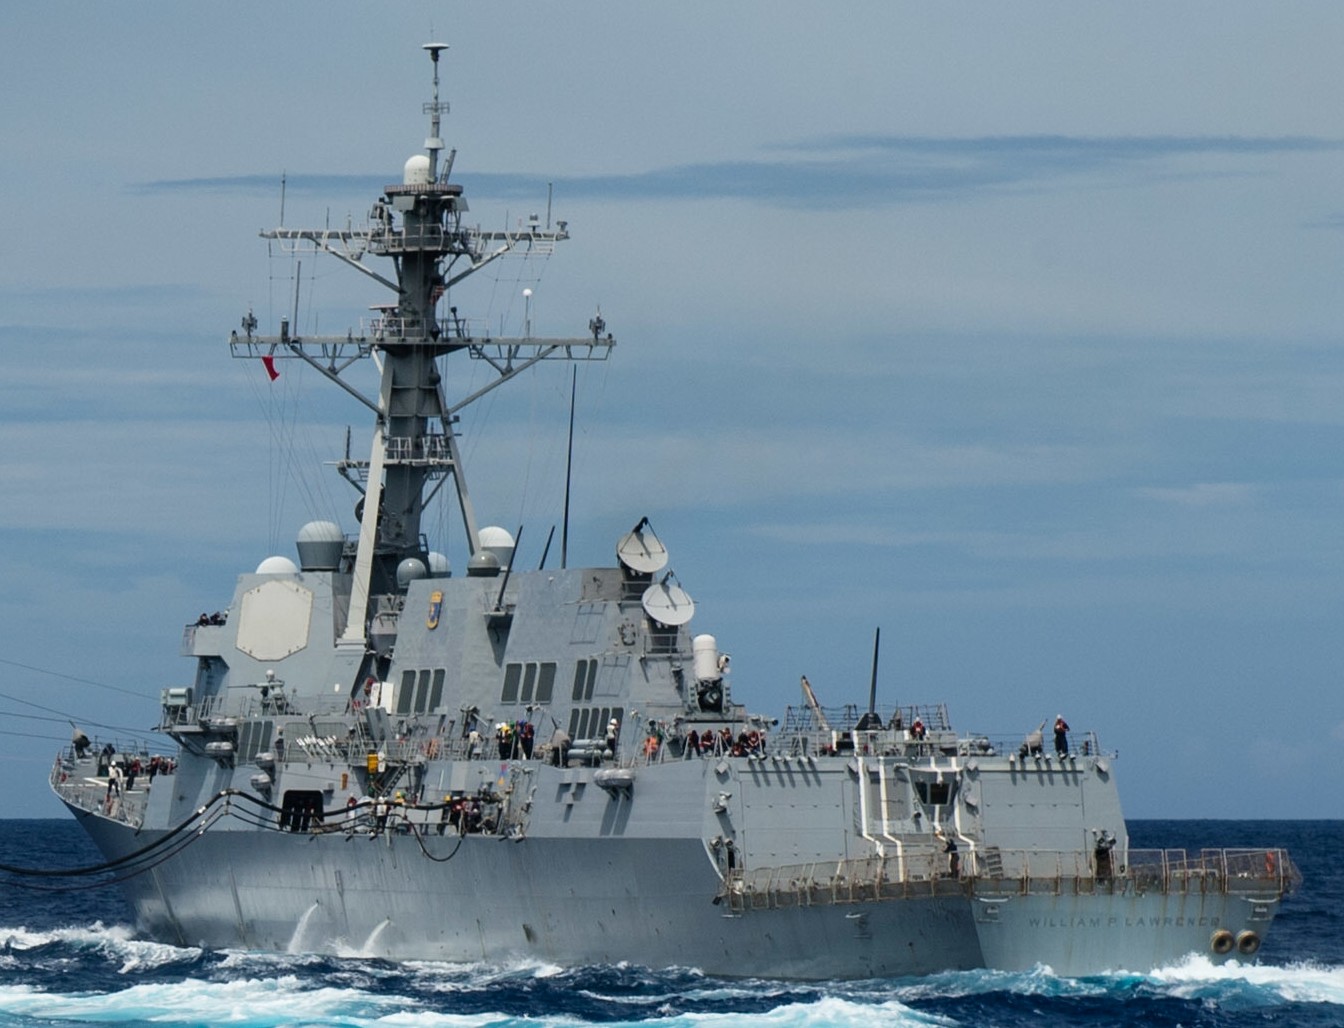 ddg-110 uss william p. lawrence arleigh burke class guided missile destroyer aegis us navy 21